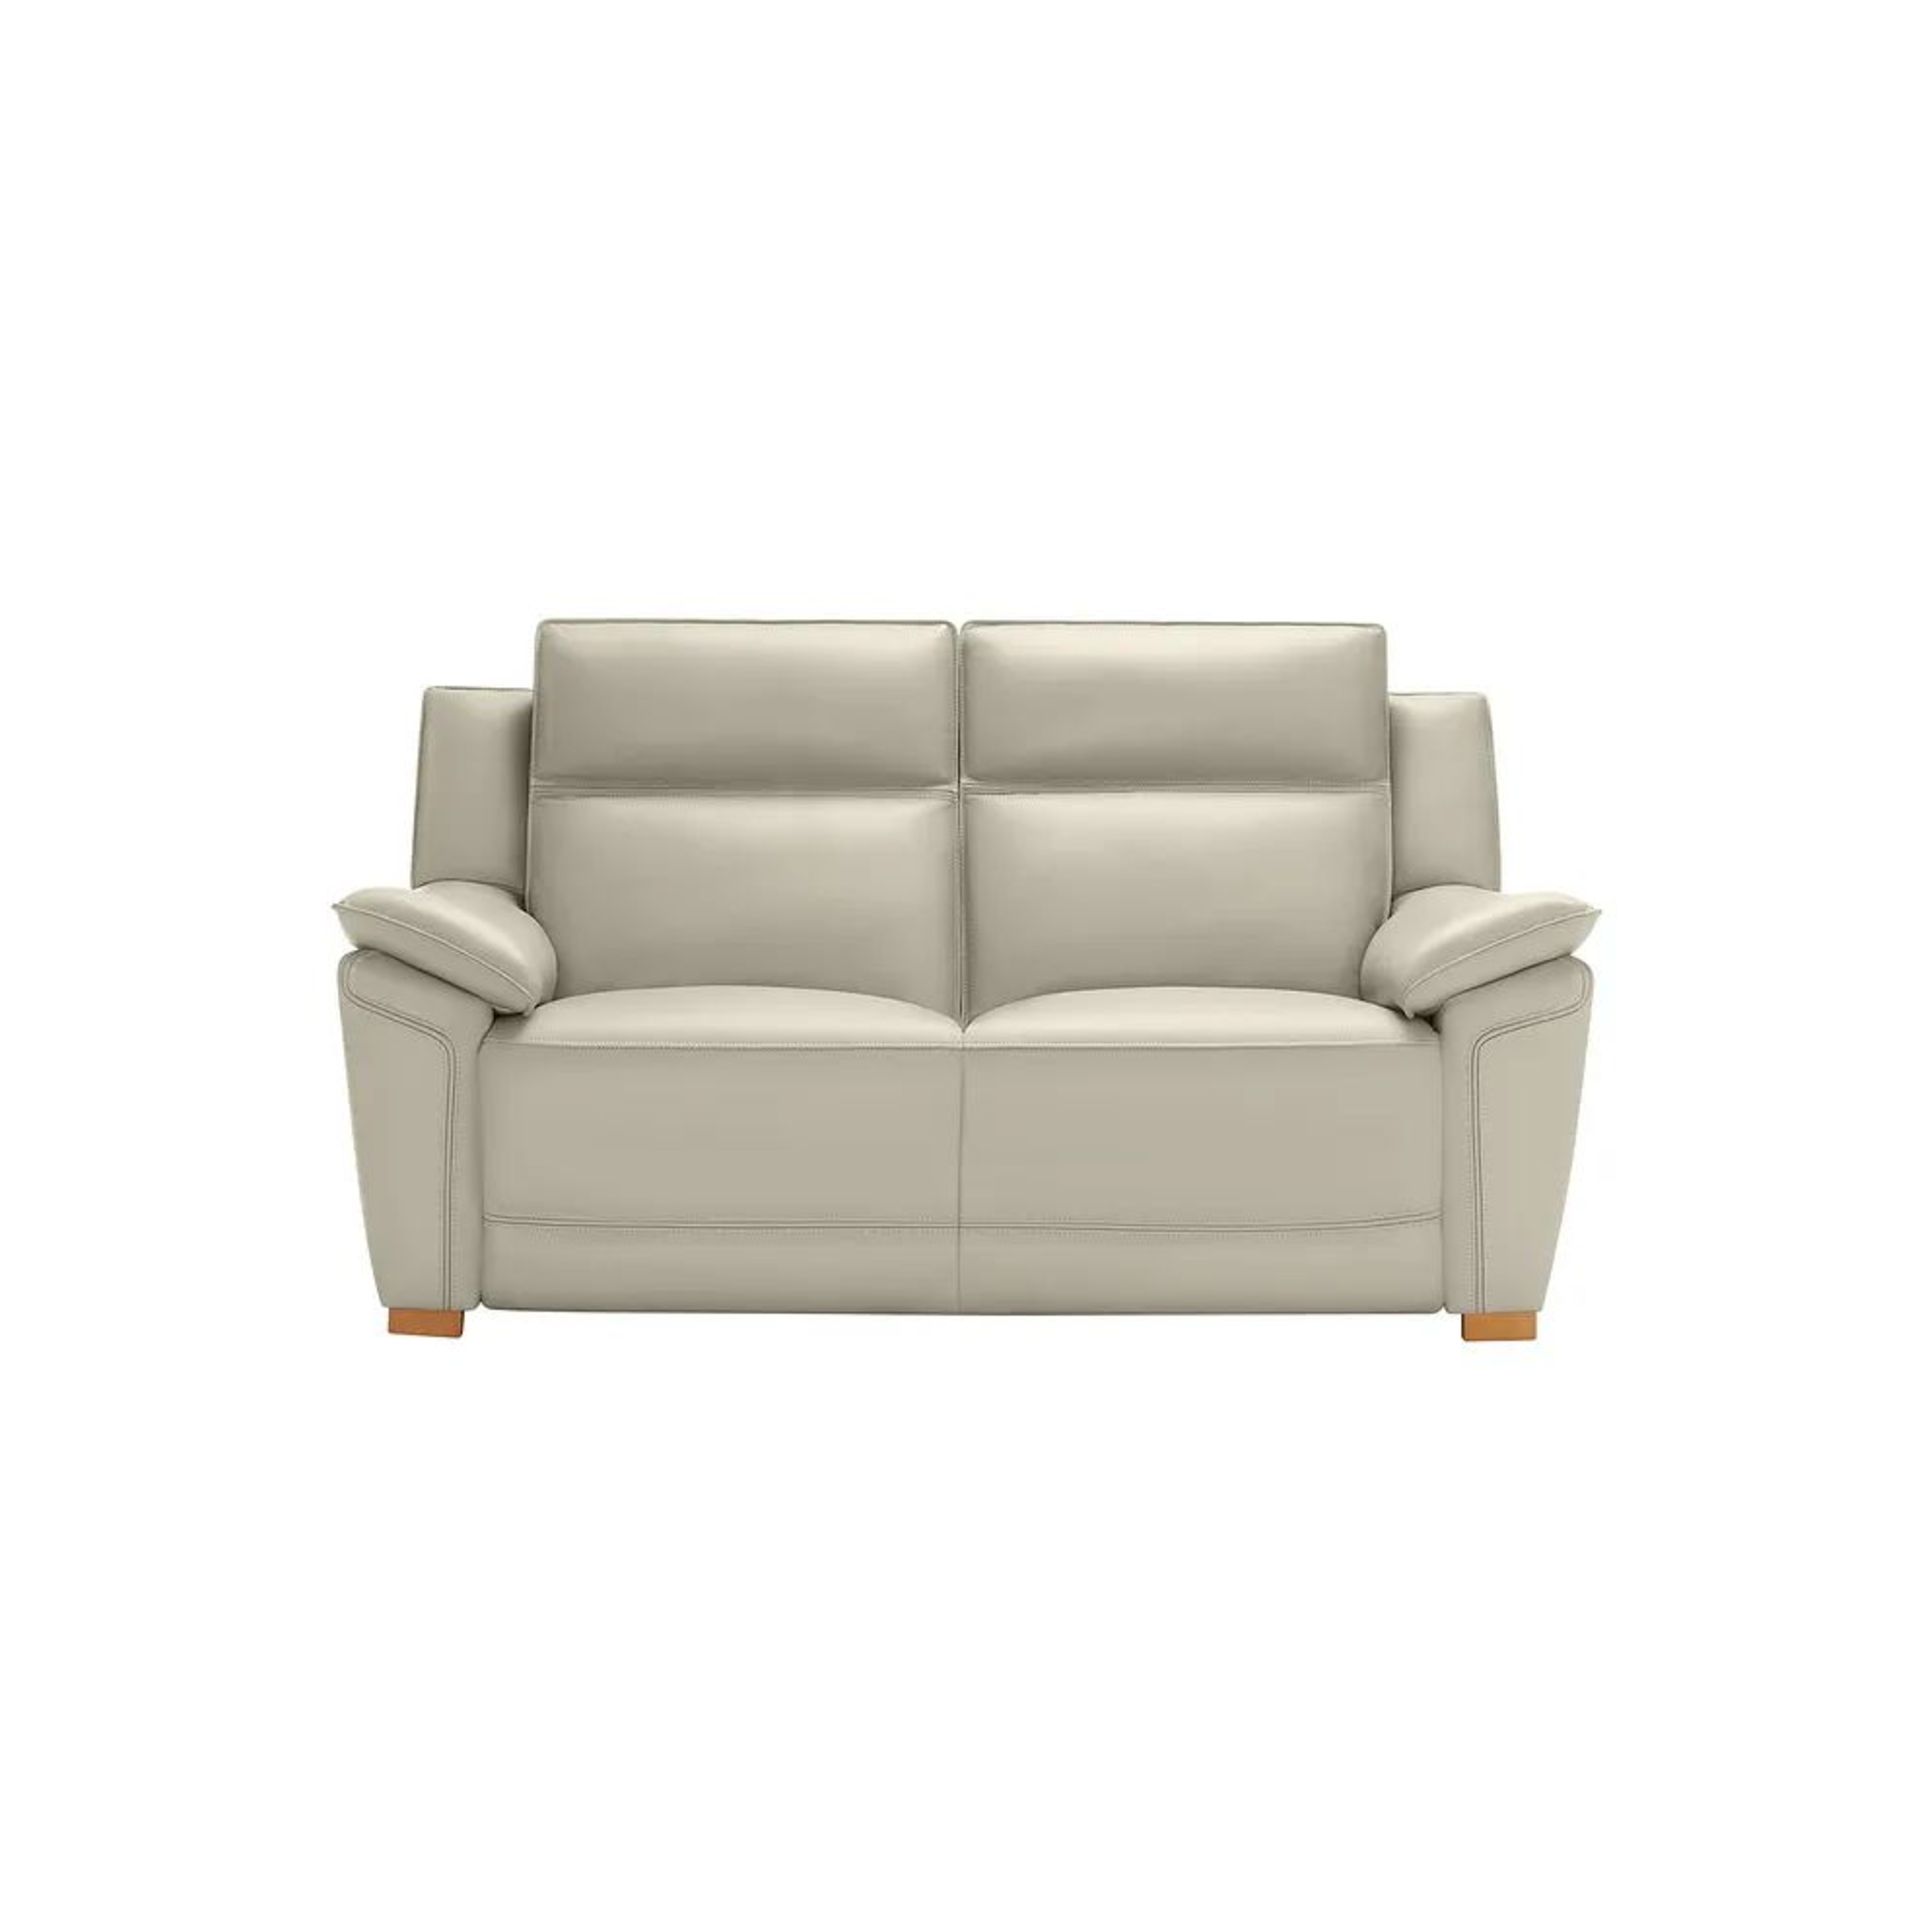 BRAND NEW DUNE 2 Seater Sofa - LIGHT GREY LEATHER. RRP £1579. Pairing comfort with classic design, - Image 2 of 8